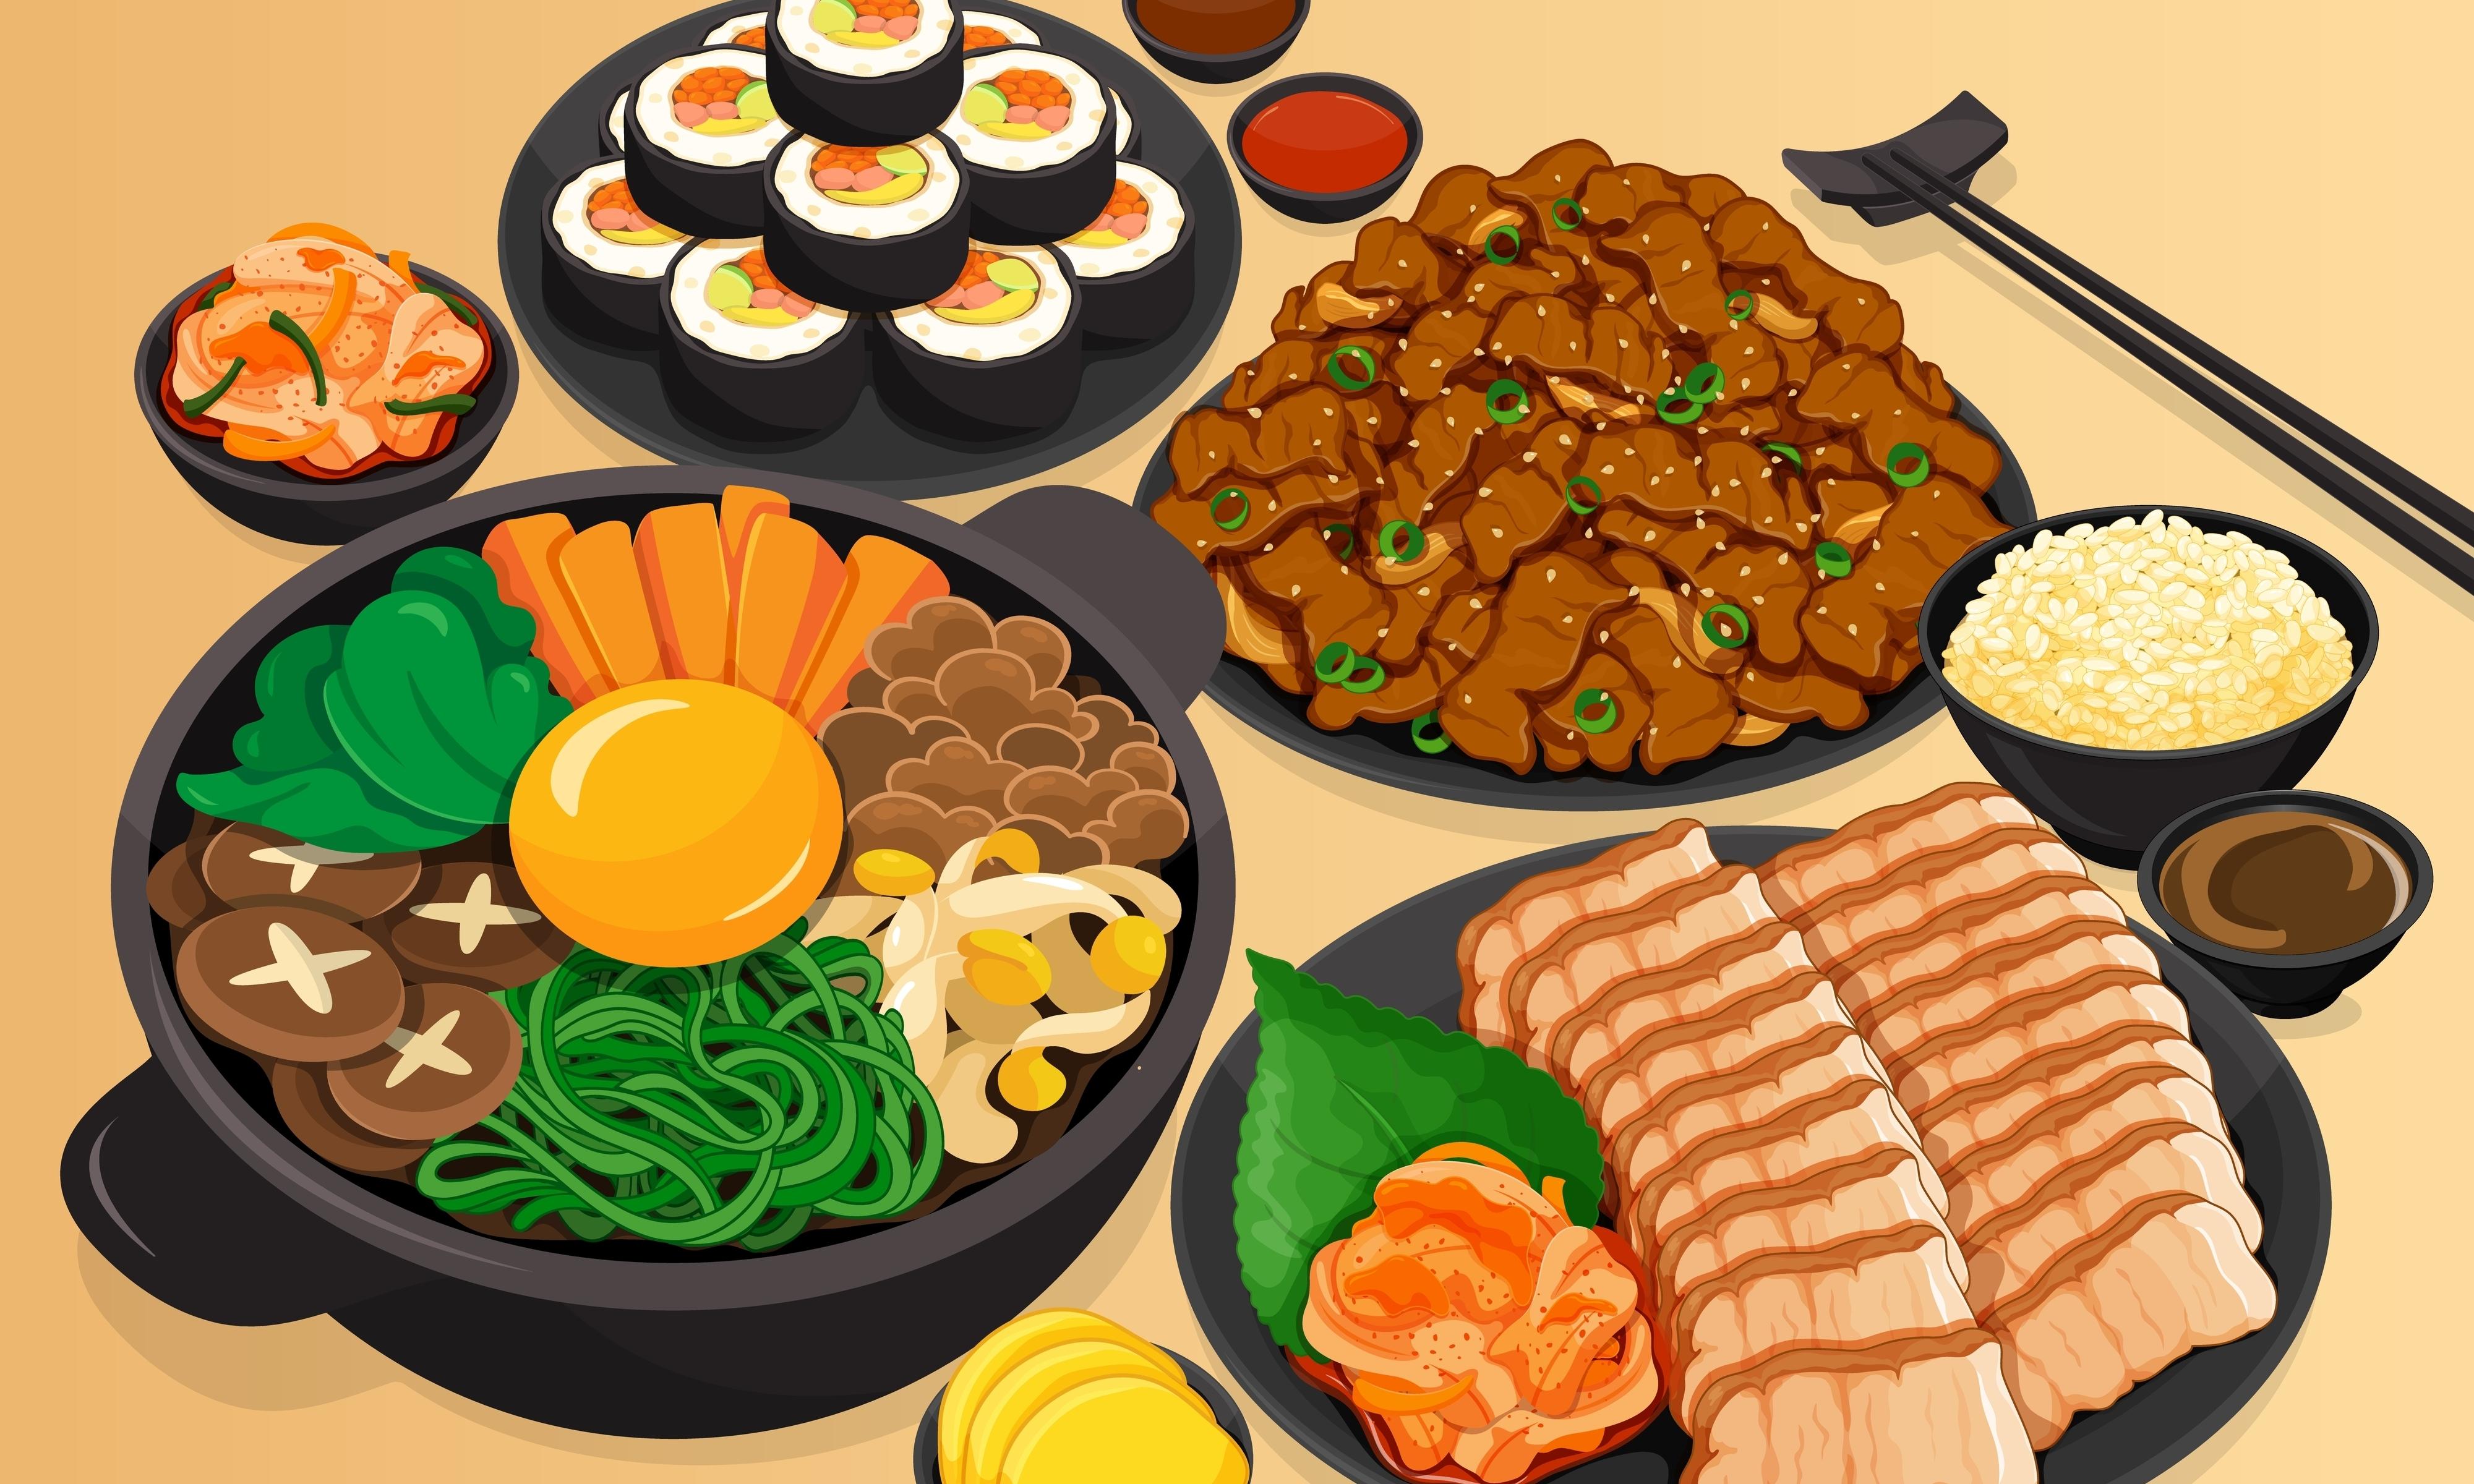 10 Japanese Recipes From Animes - Food Wars To Wage In Real Life